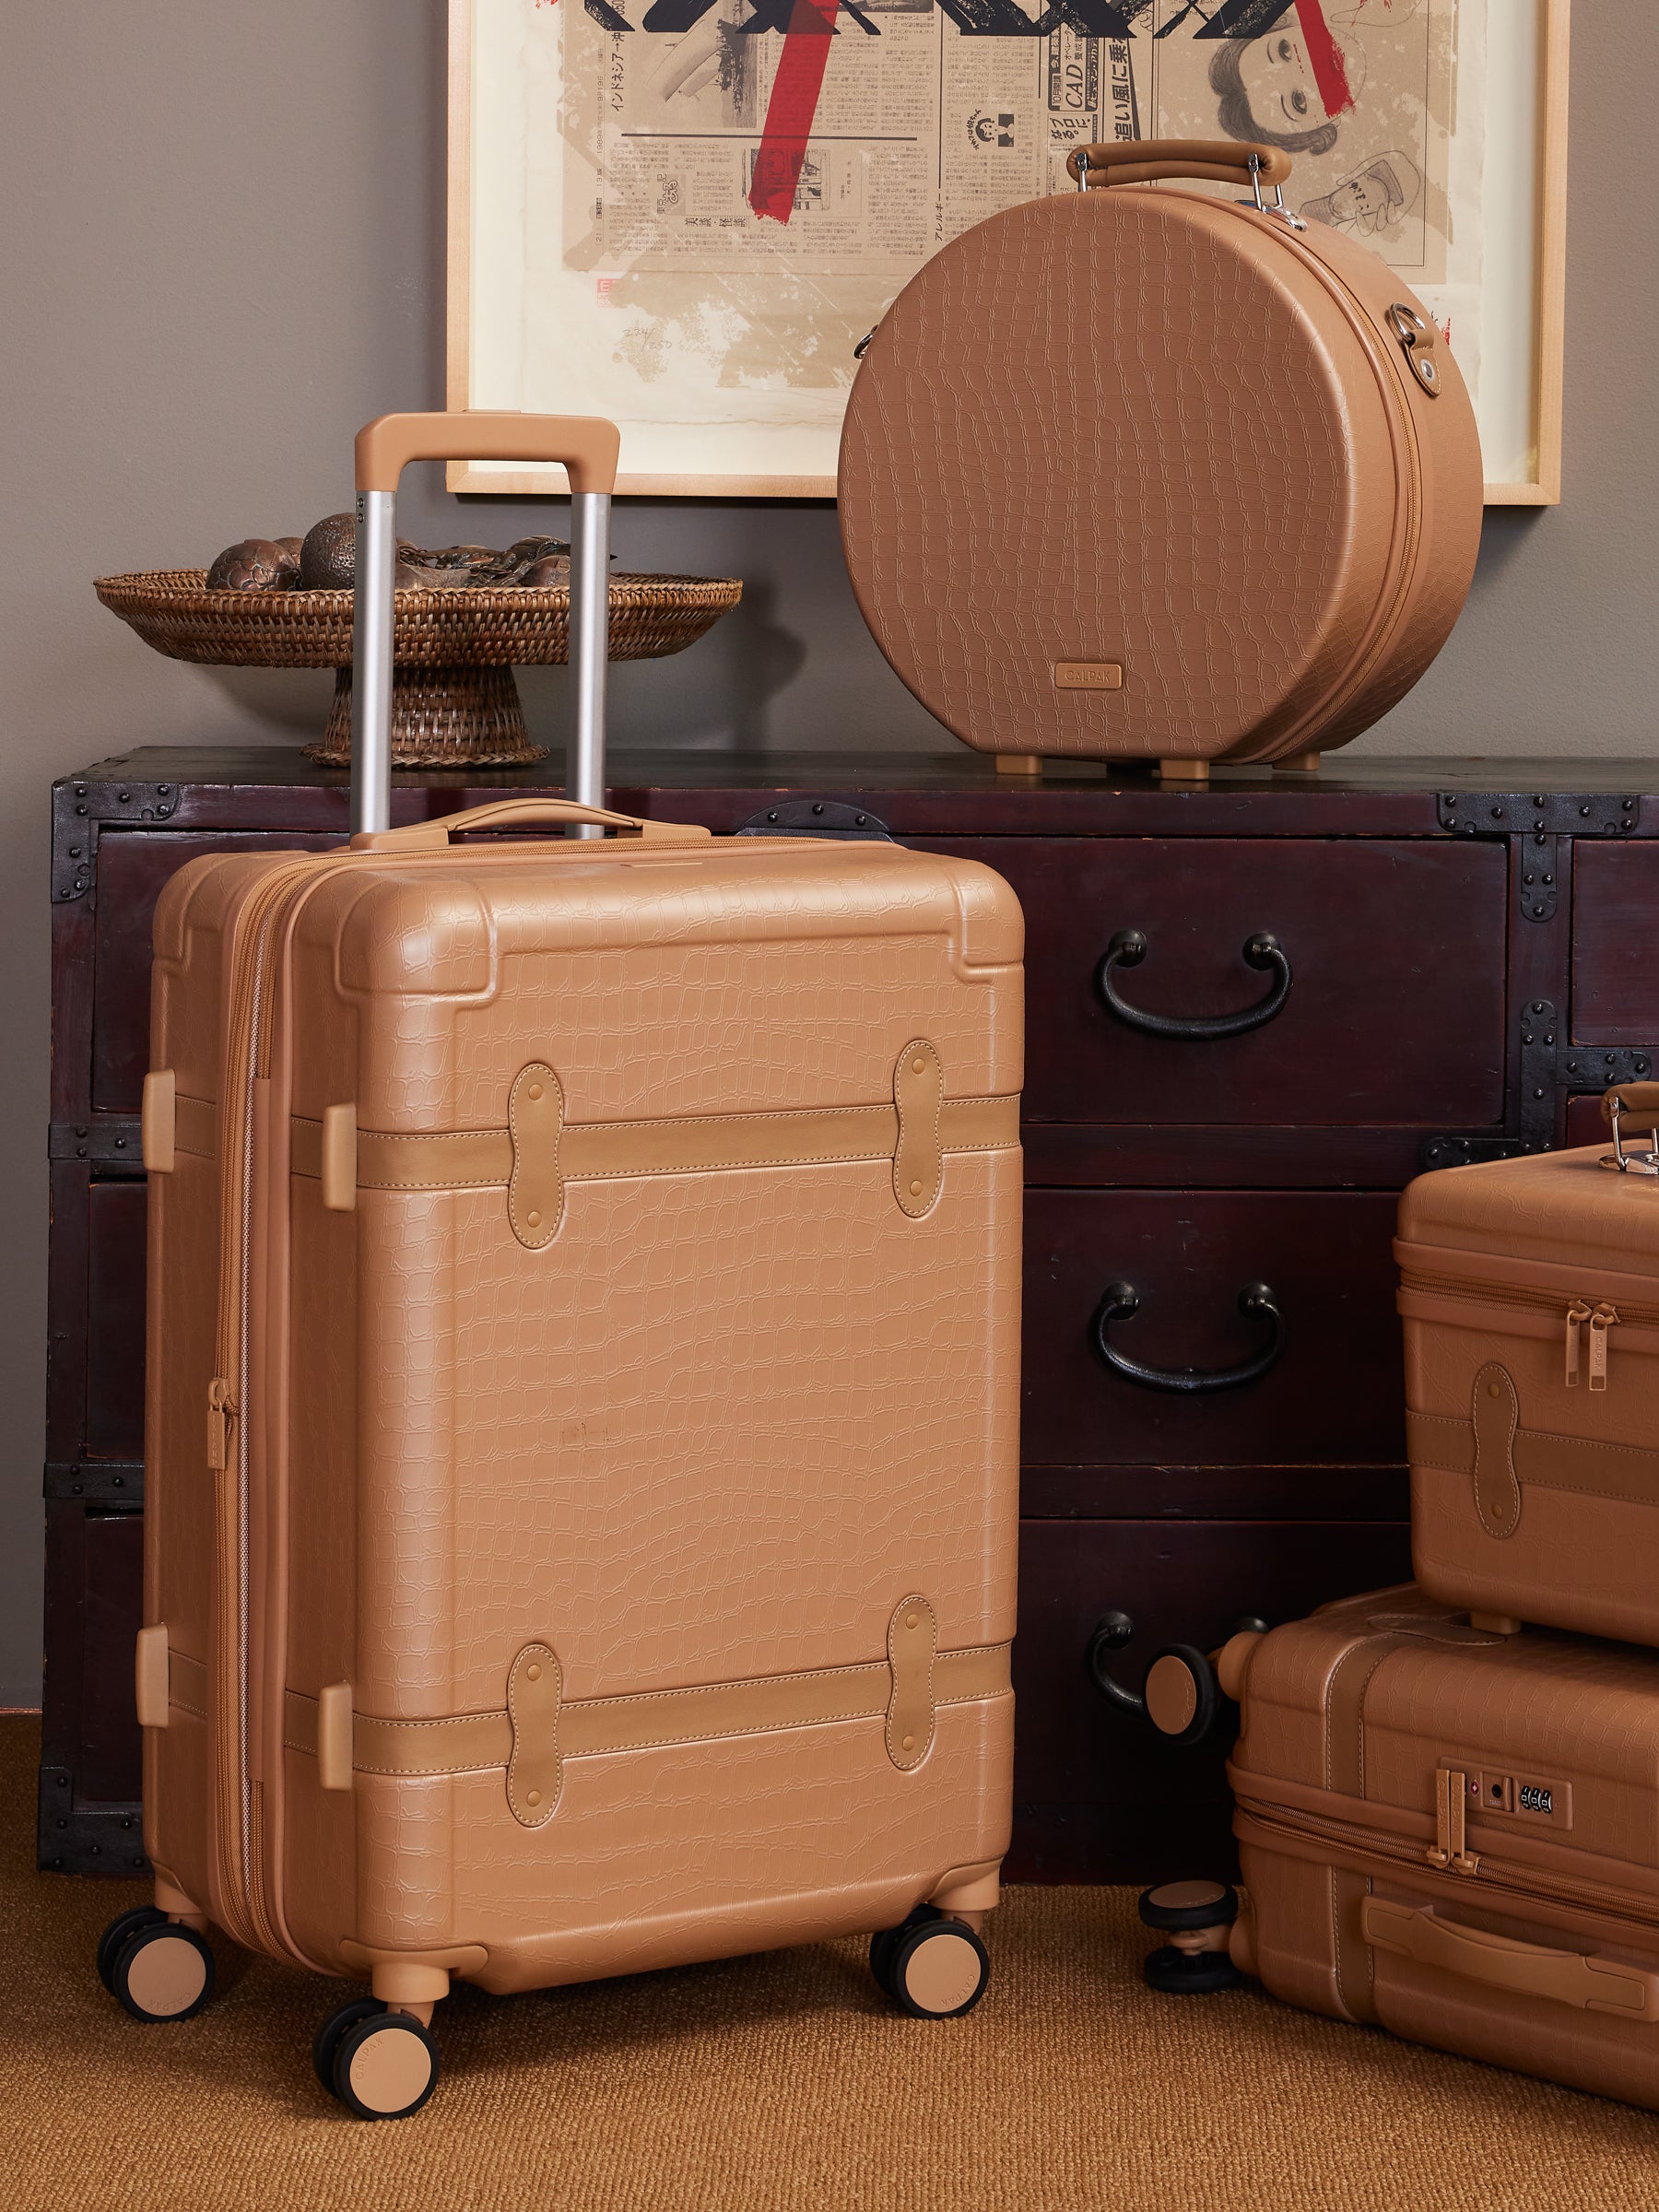 25 inch rolling hard shell beige almond suitcase as a part of CALPAK TRNK luggage collection in vintage trunk style